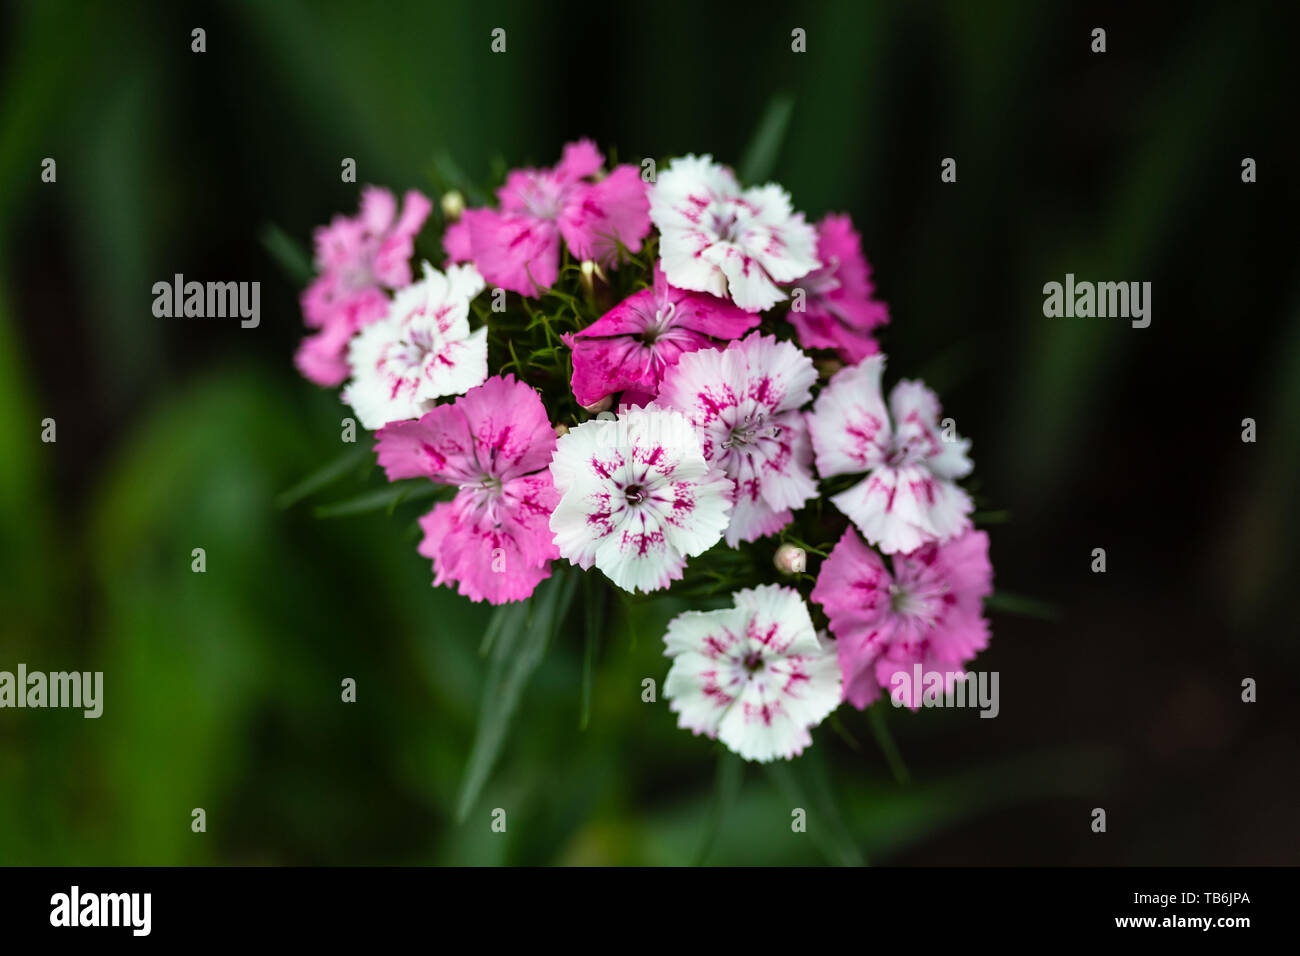 a pink and white garden phlox blooming in the garden Stock Photo